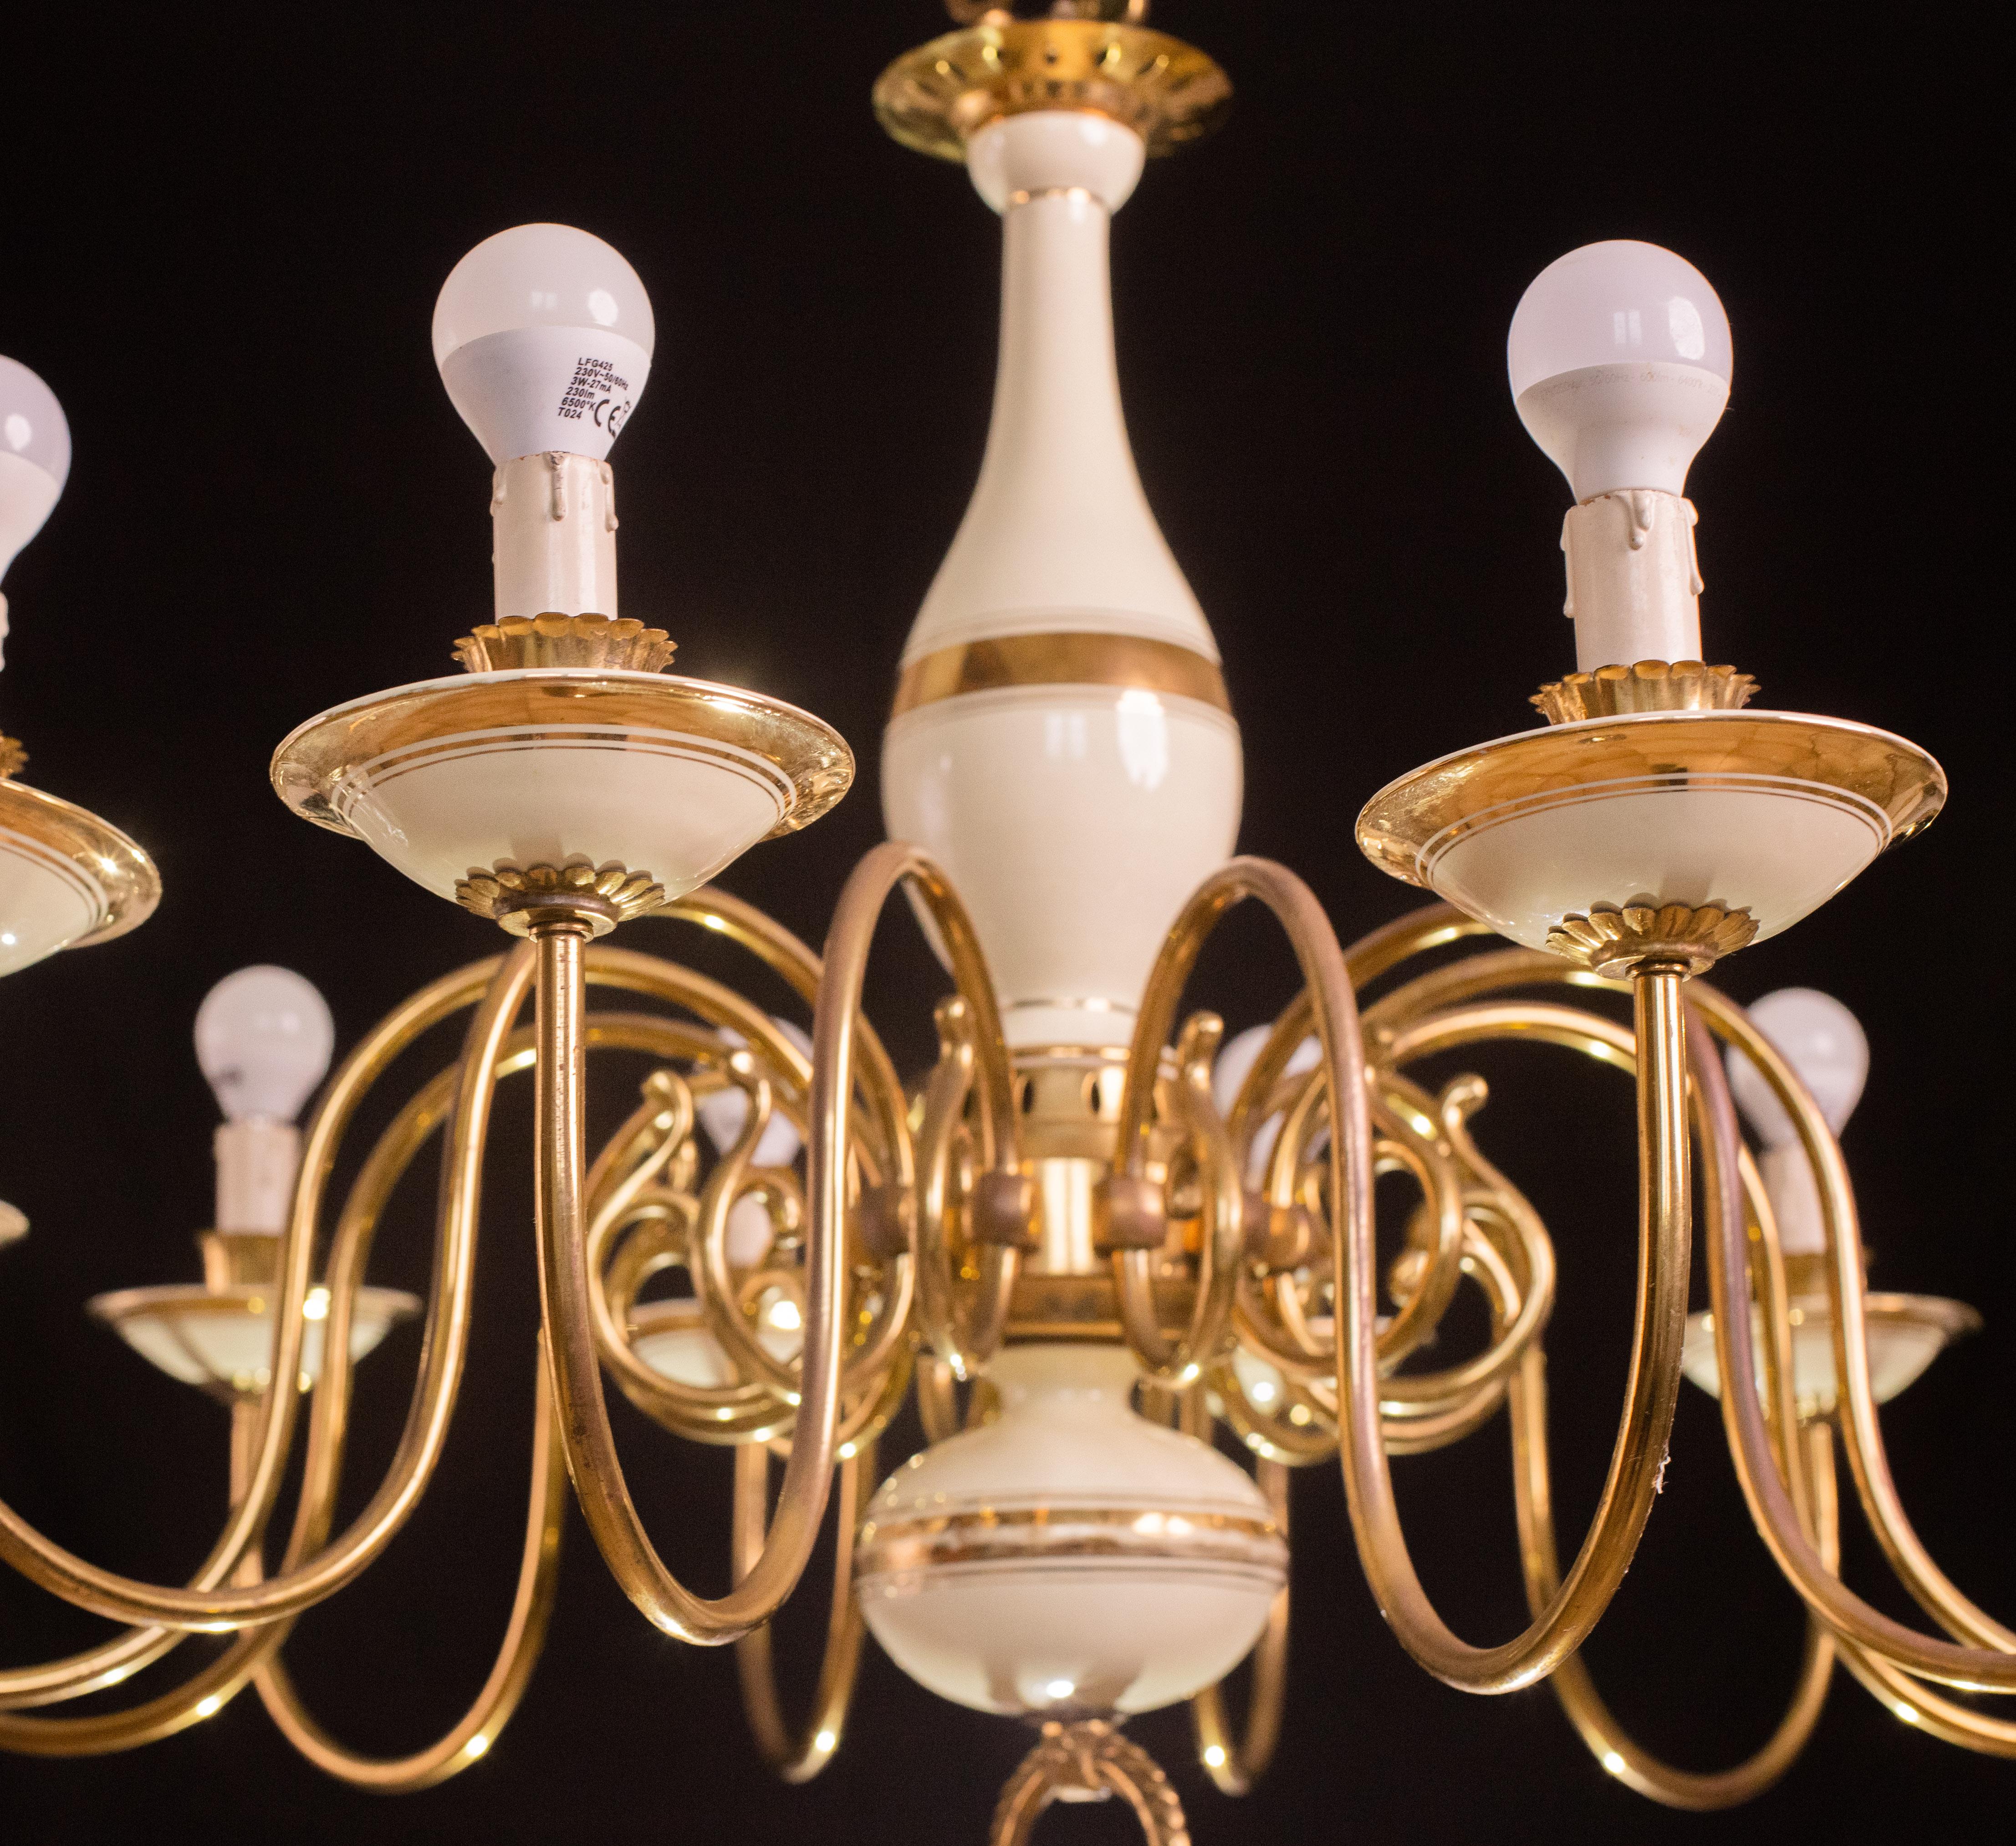 Monumental 12 Lights Art Deco Brass and Ceramic Chandelier, 1950s For Sale 6